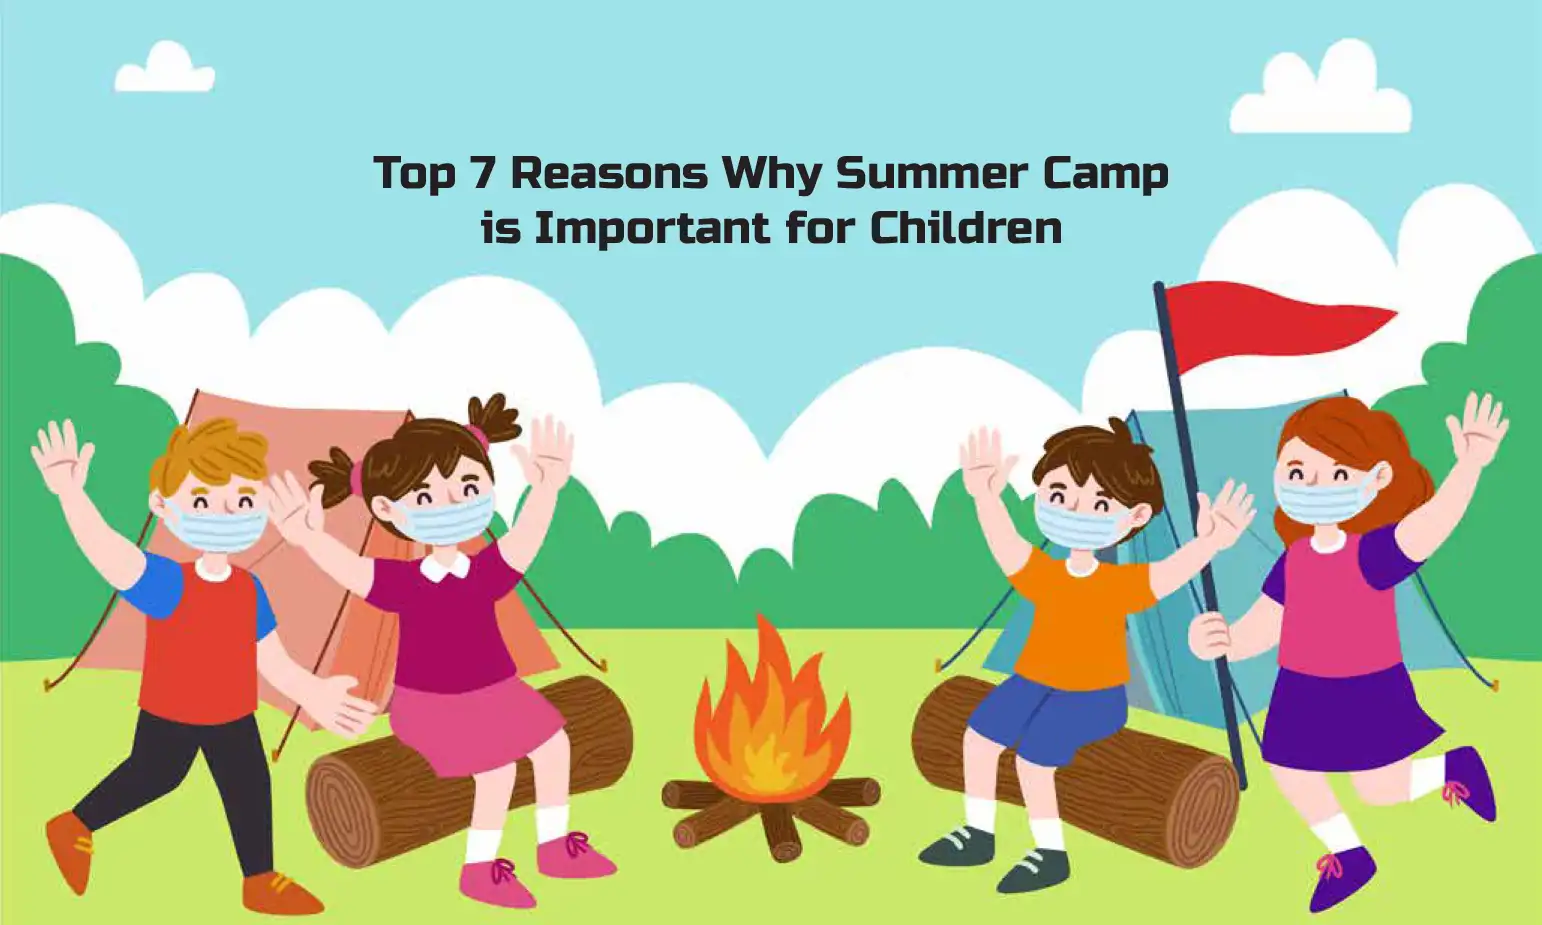 Top 7 Reasons Why Summer Camp is Important for Children